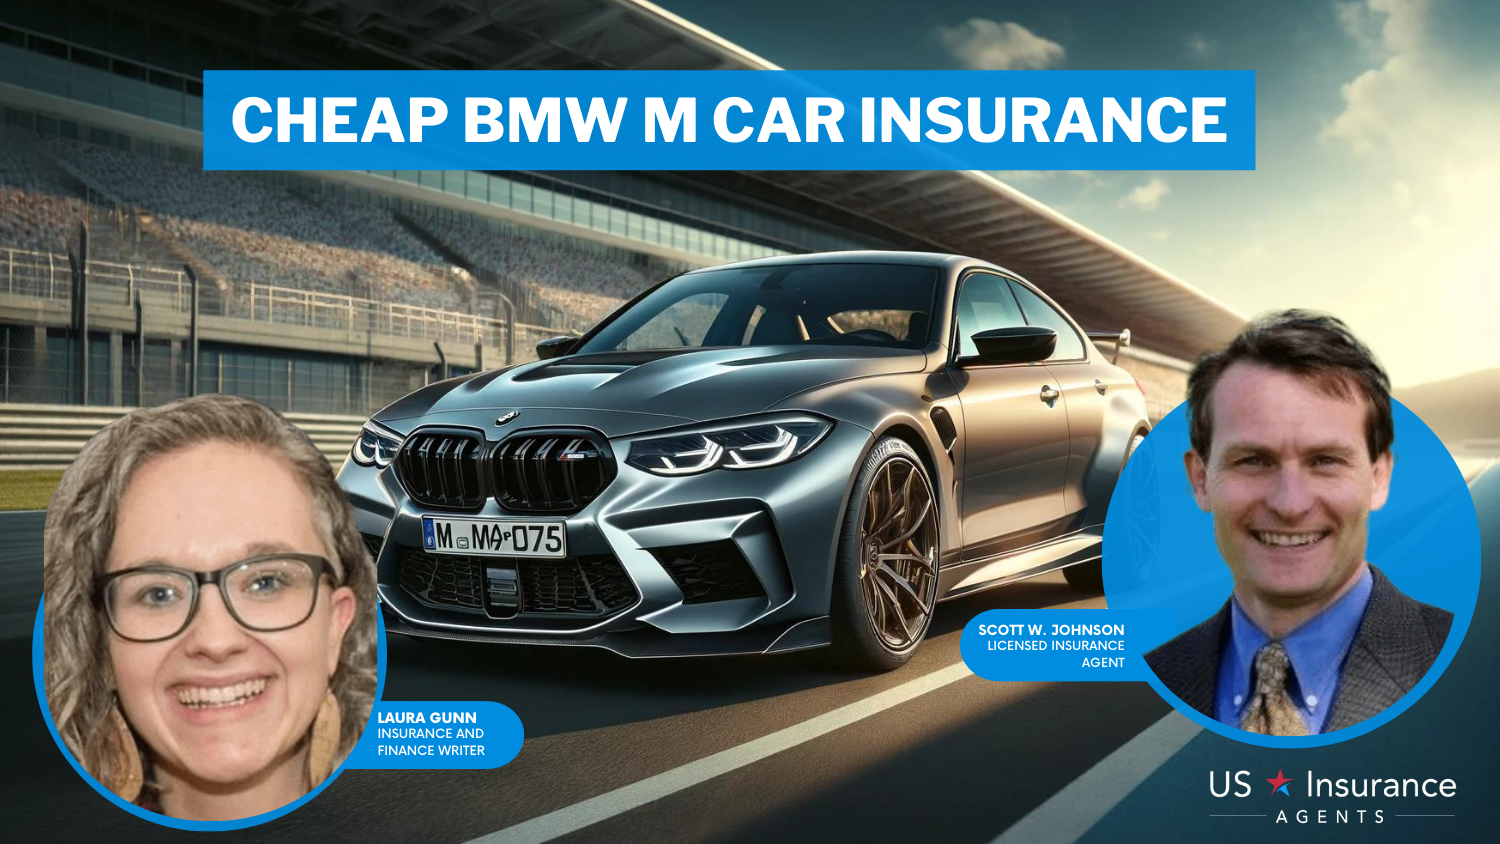 Cheap BMW M Car Insurance: Allstate, Nationwide, and State Farm